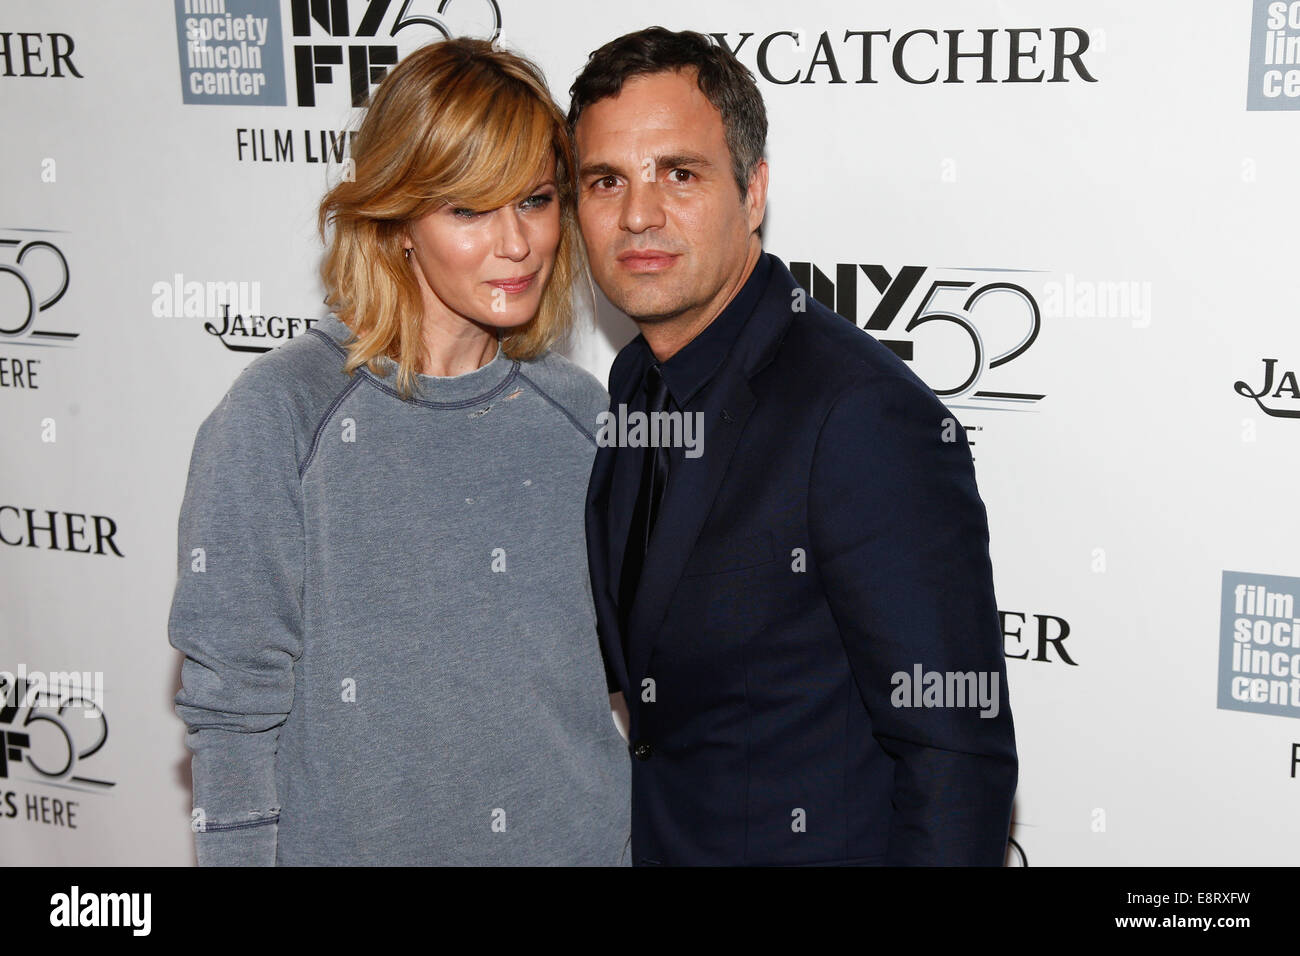 NEW YORK-OCT 10: Actor Mark Ruffalo (R) and Sunrise Coigney attend the 'Foxcatcher' premiere at the 52nd New York Film Festival at Alice Tully Hall on October 10, 2014 in New York City. Stock Photo